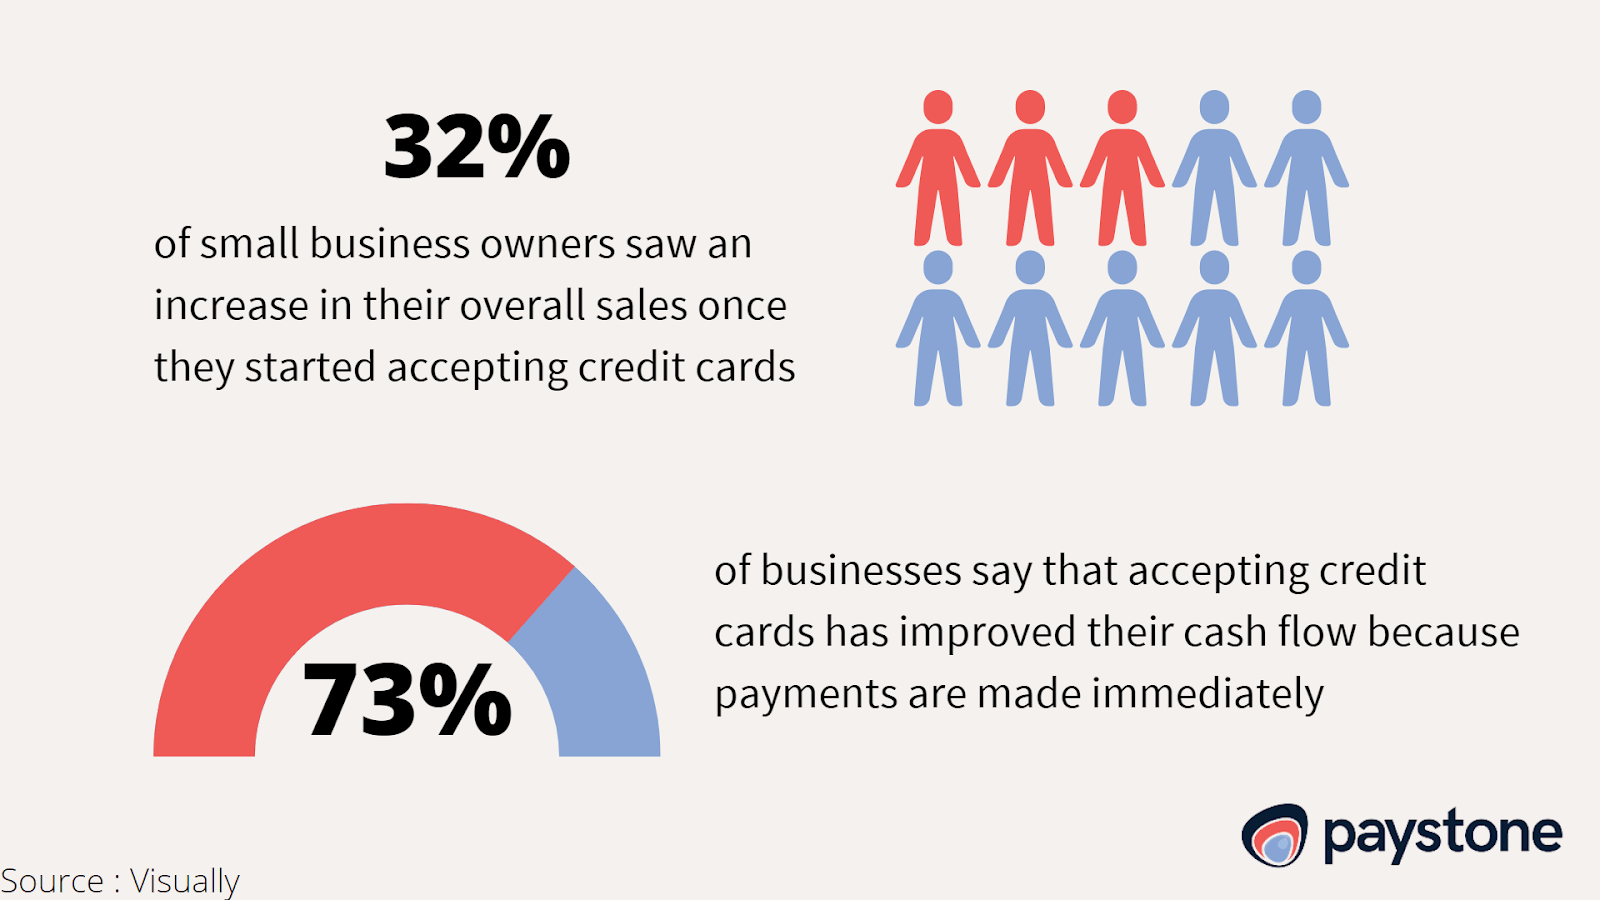 32% of business owners saw sales increase when they accepted credit cards and 73% say accepting credit cards improve cash flow.